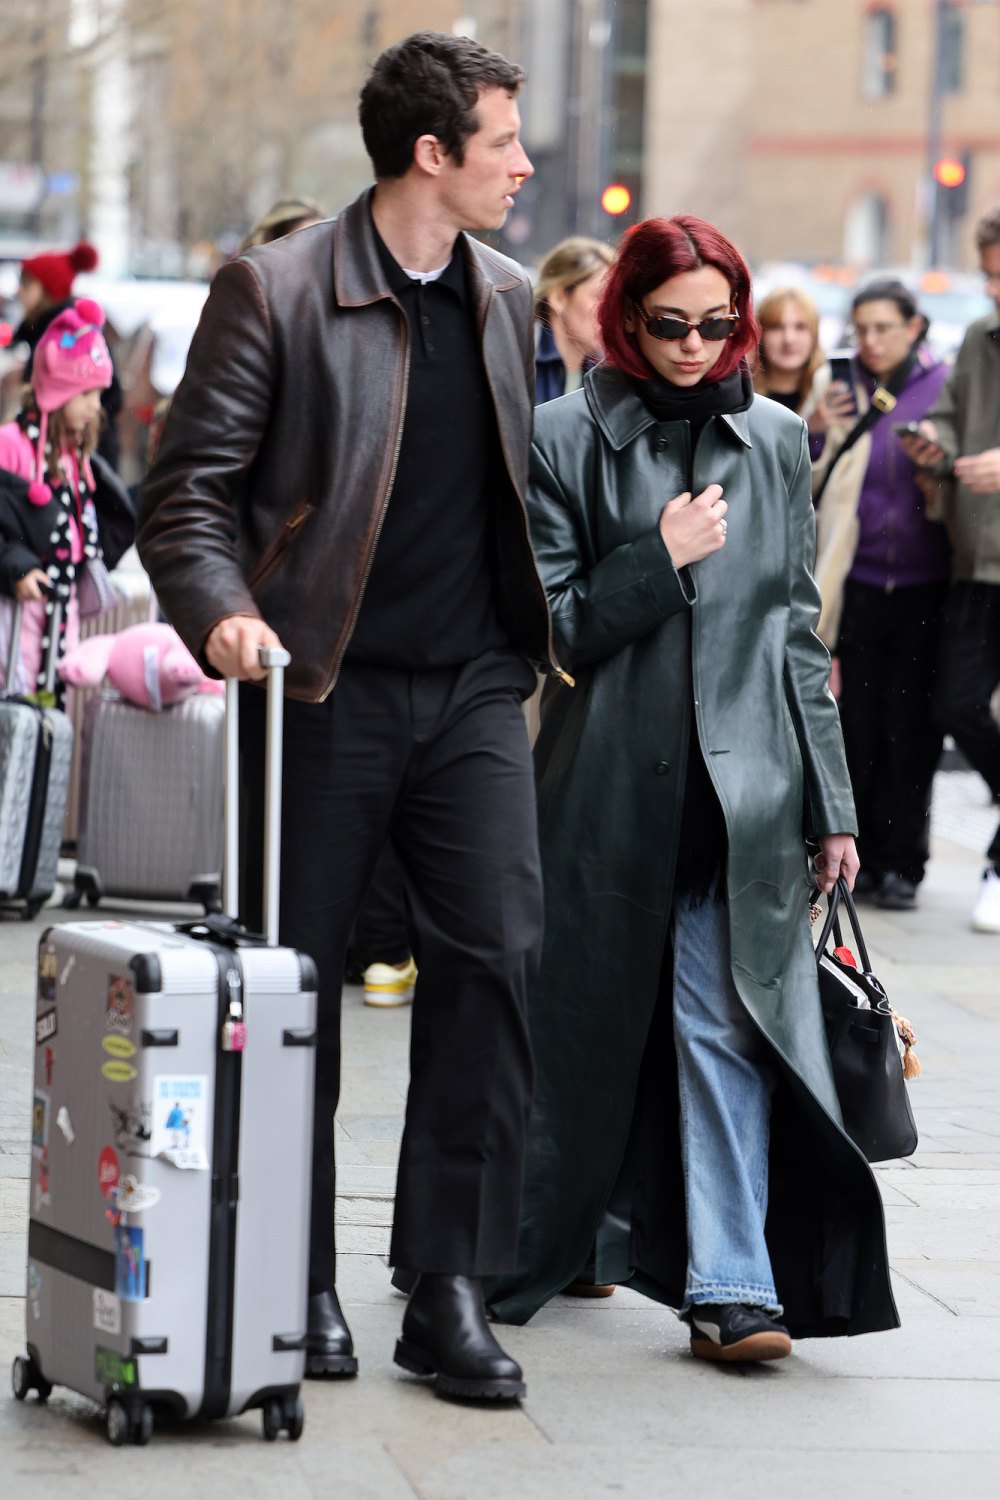 Dua Lipa and Boyfriend Callum Turner Travel Together in Style in Coordinated Leather Jackets